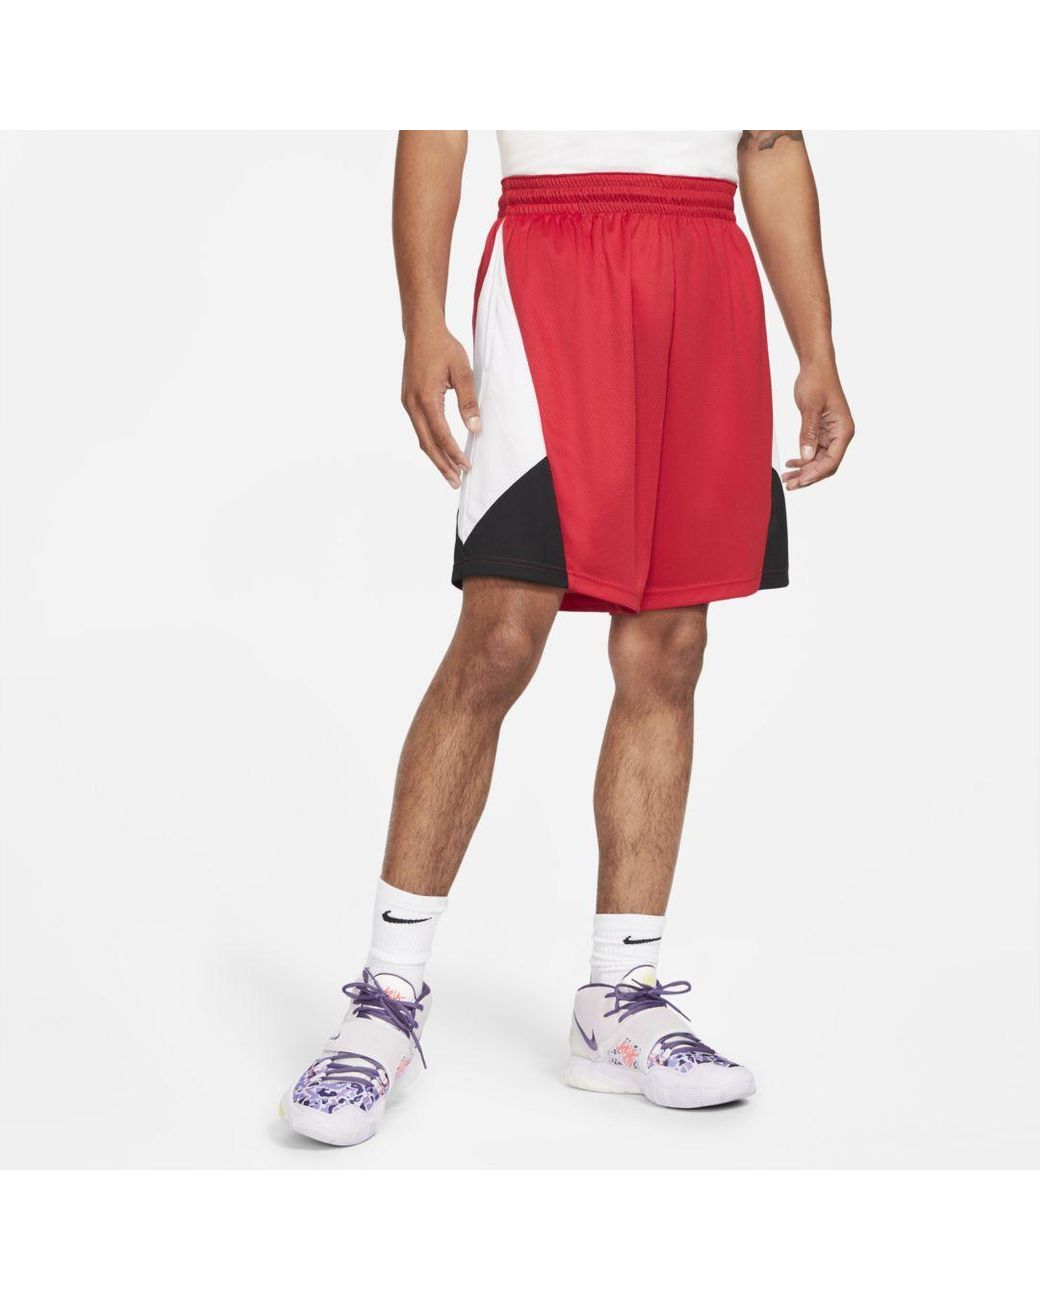 Nike Dri-fit Rival Basketball Shorts in Red for Men - Lyst